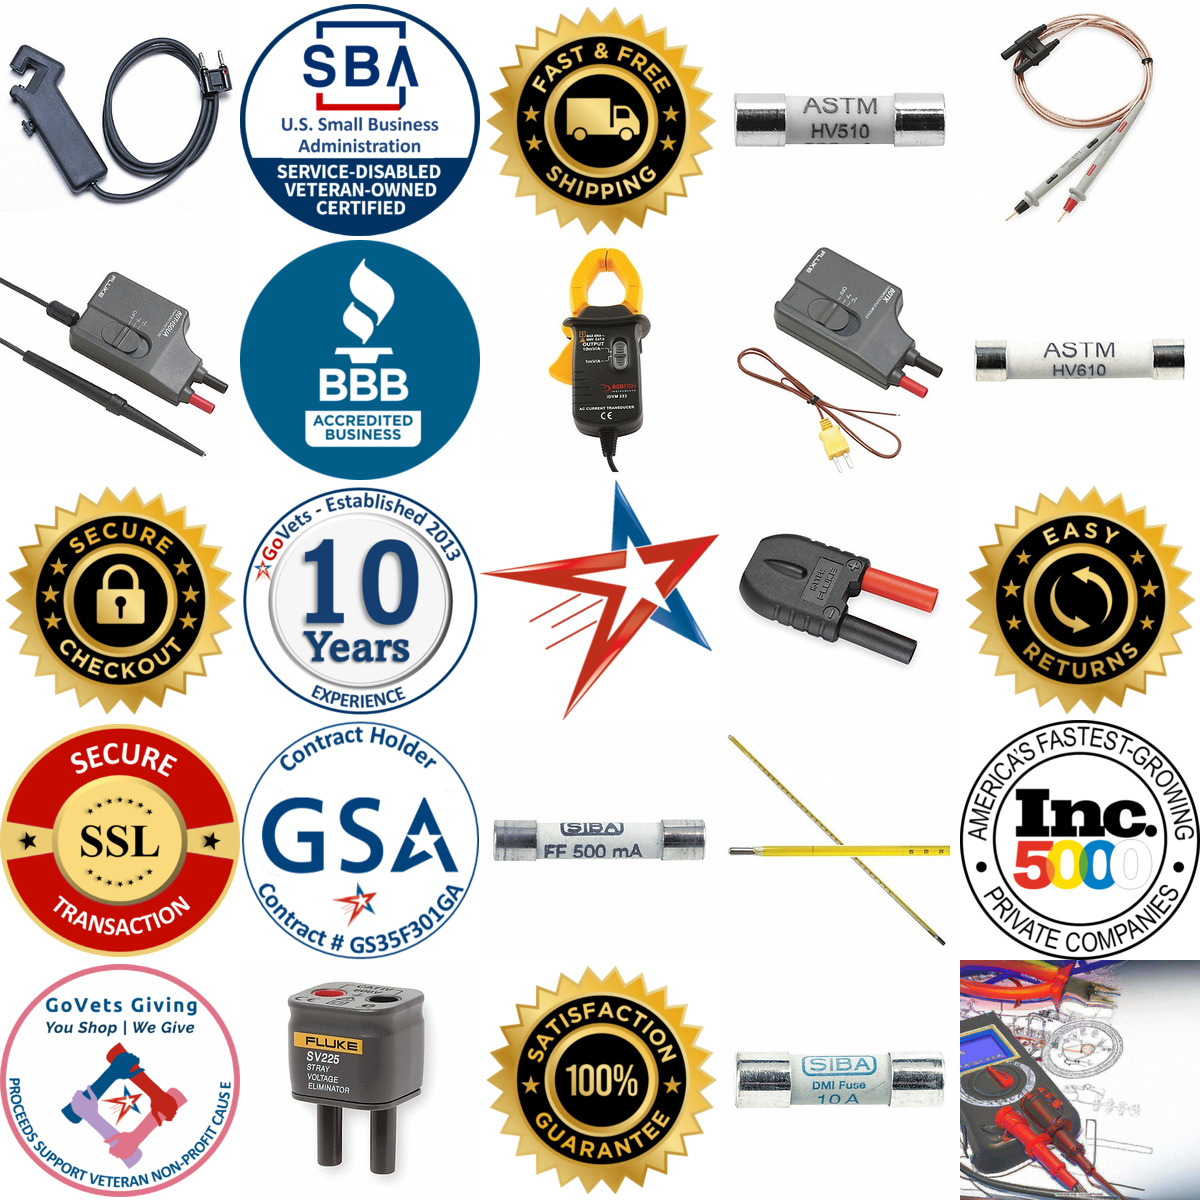 A selection of Multimeter Adapters products on GoVets